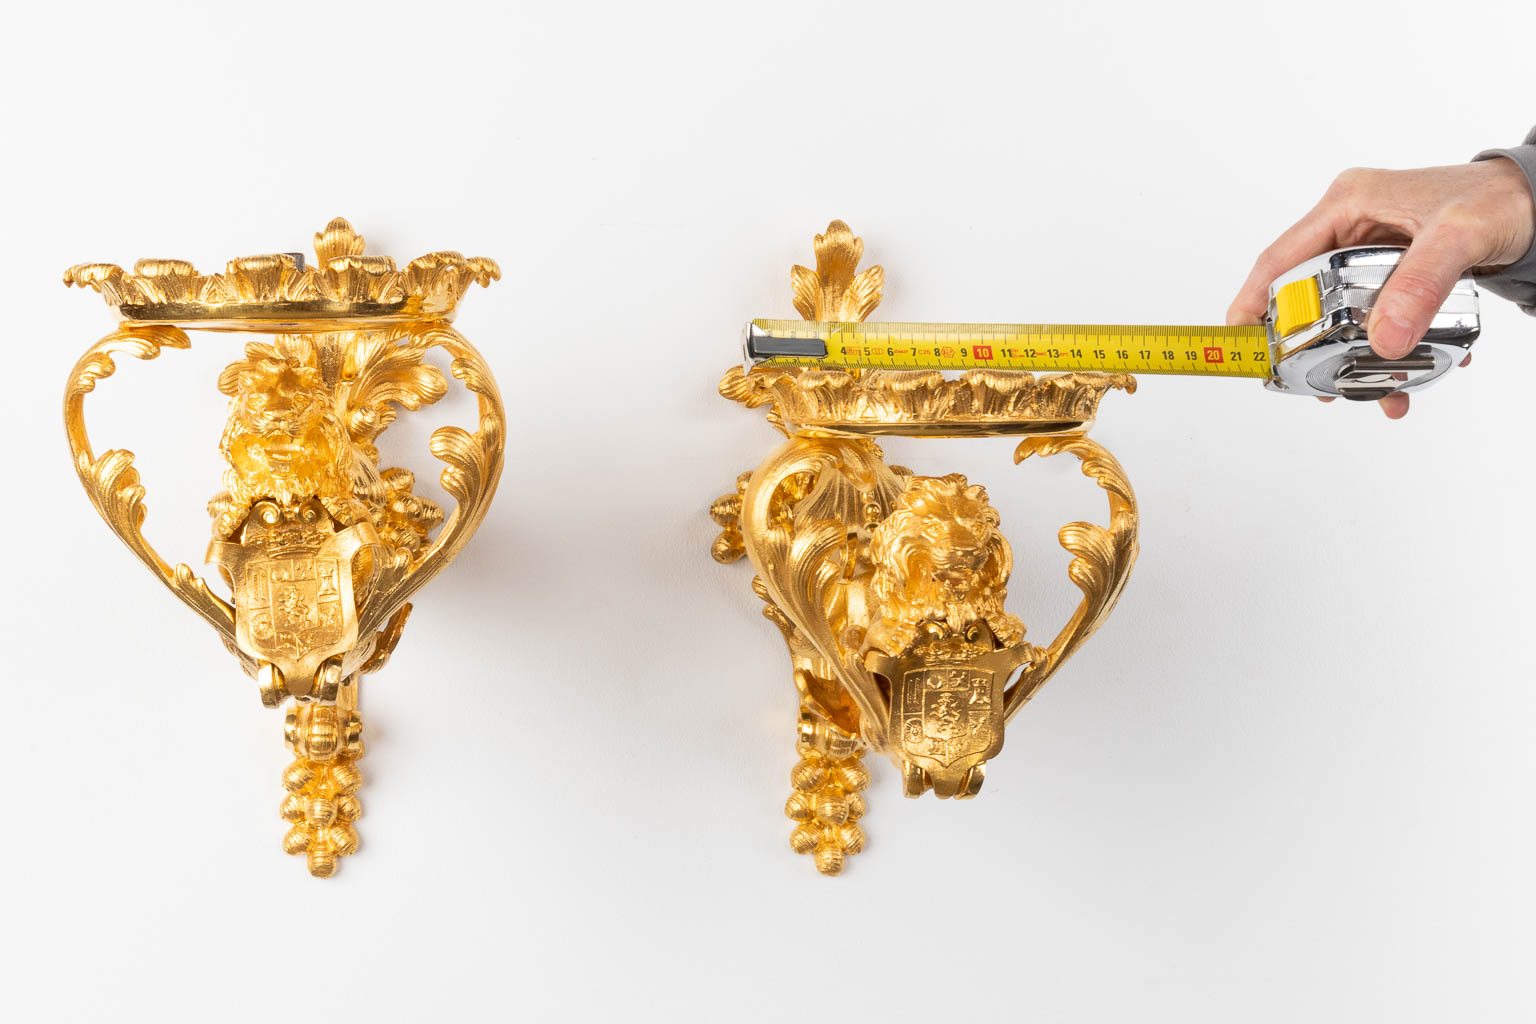 A pair of wall lamps or candle holders, lions with a heraldic image. Gilt bronze. Circa 1900. (D:35 x W:20 x H:35 cm)